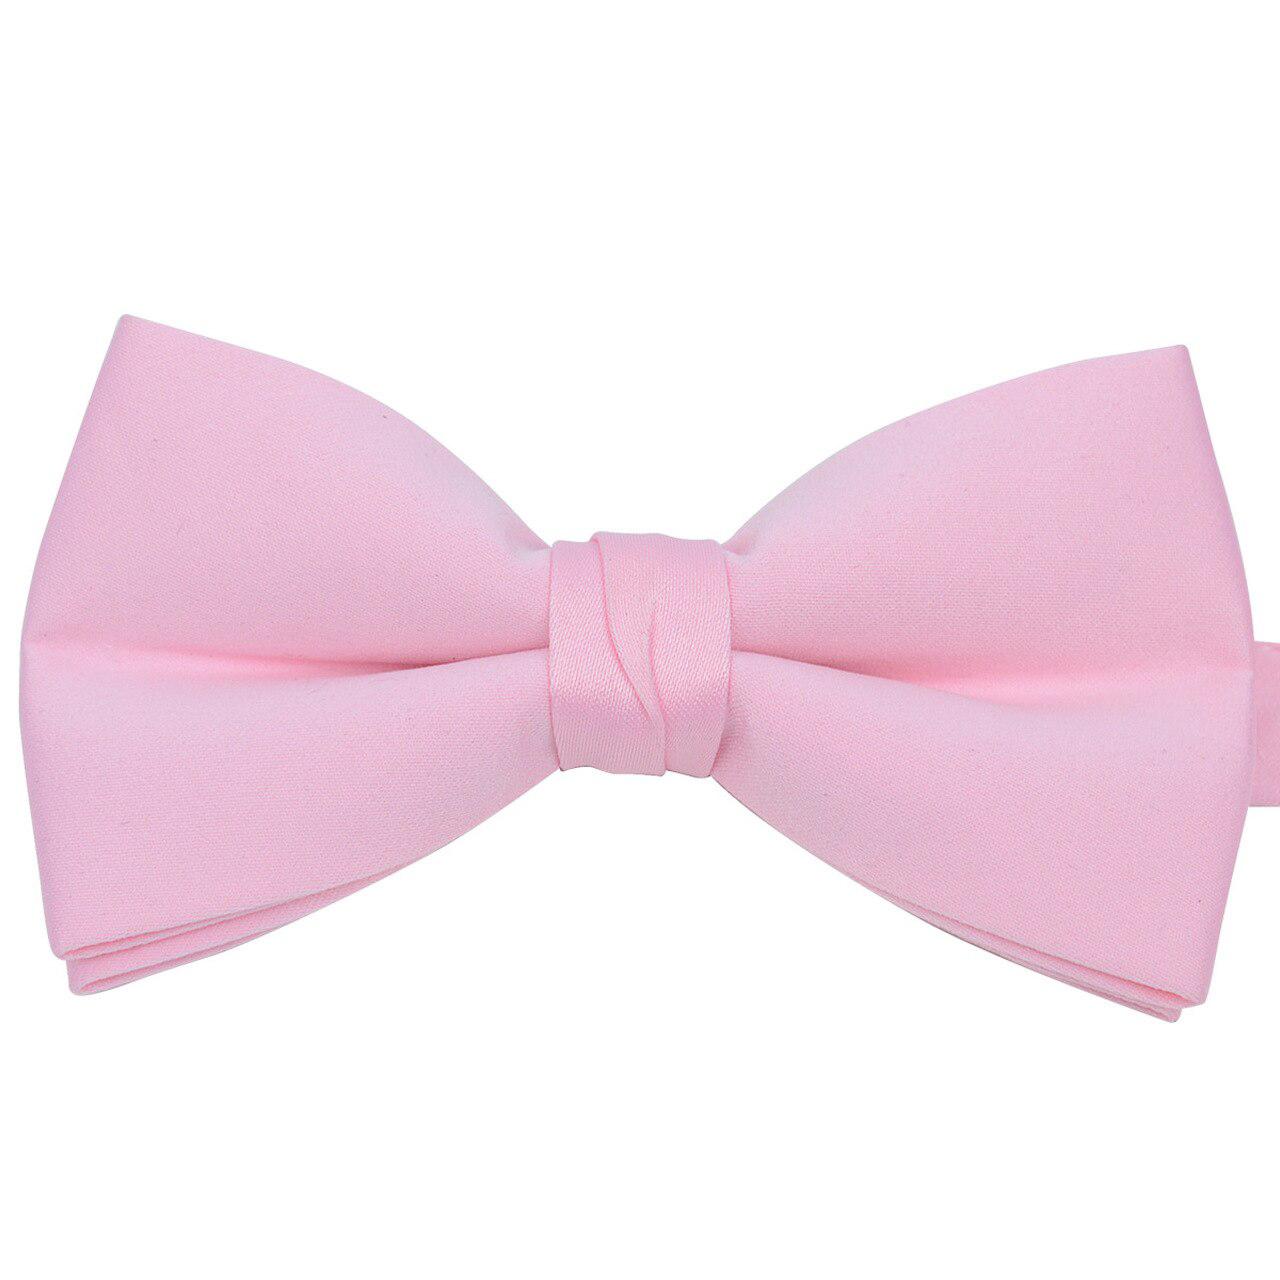  Solid Bow Tie Boxed - Pink